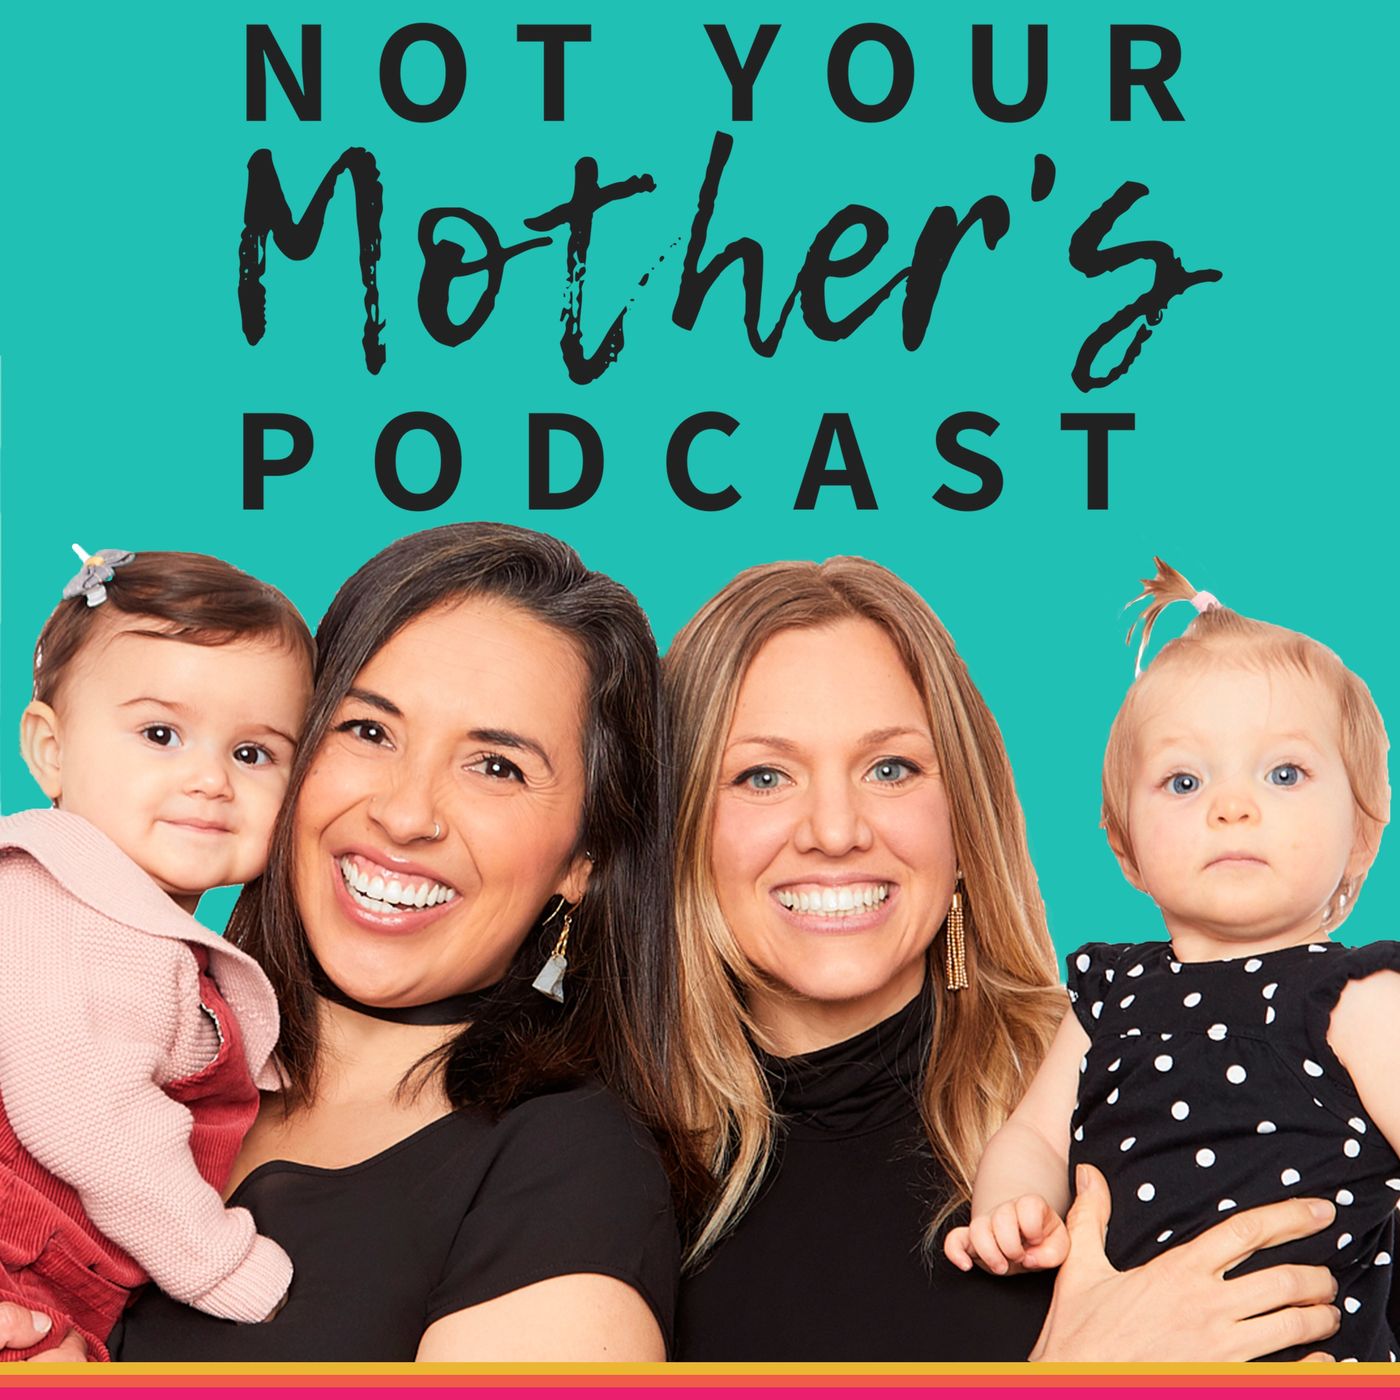 Not Your Mother's Podcast with Sonnet and Veronica